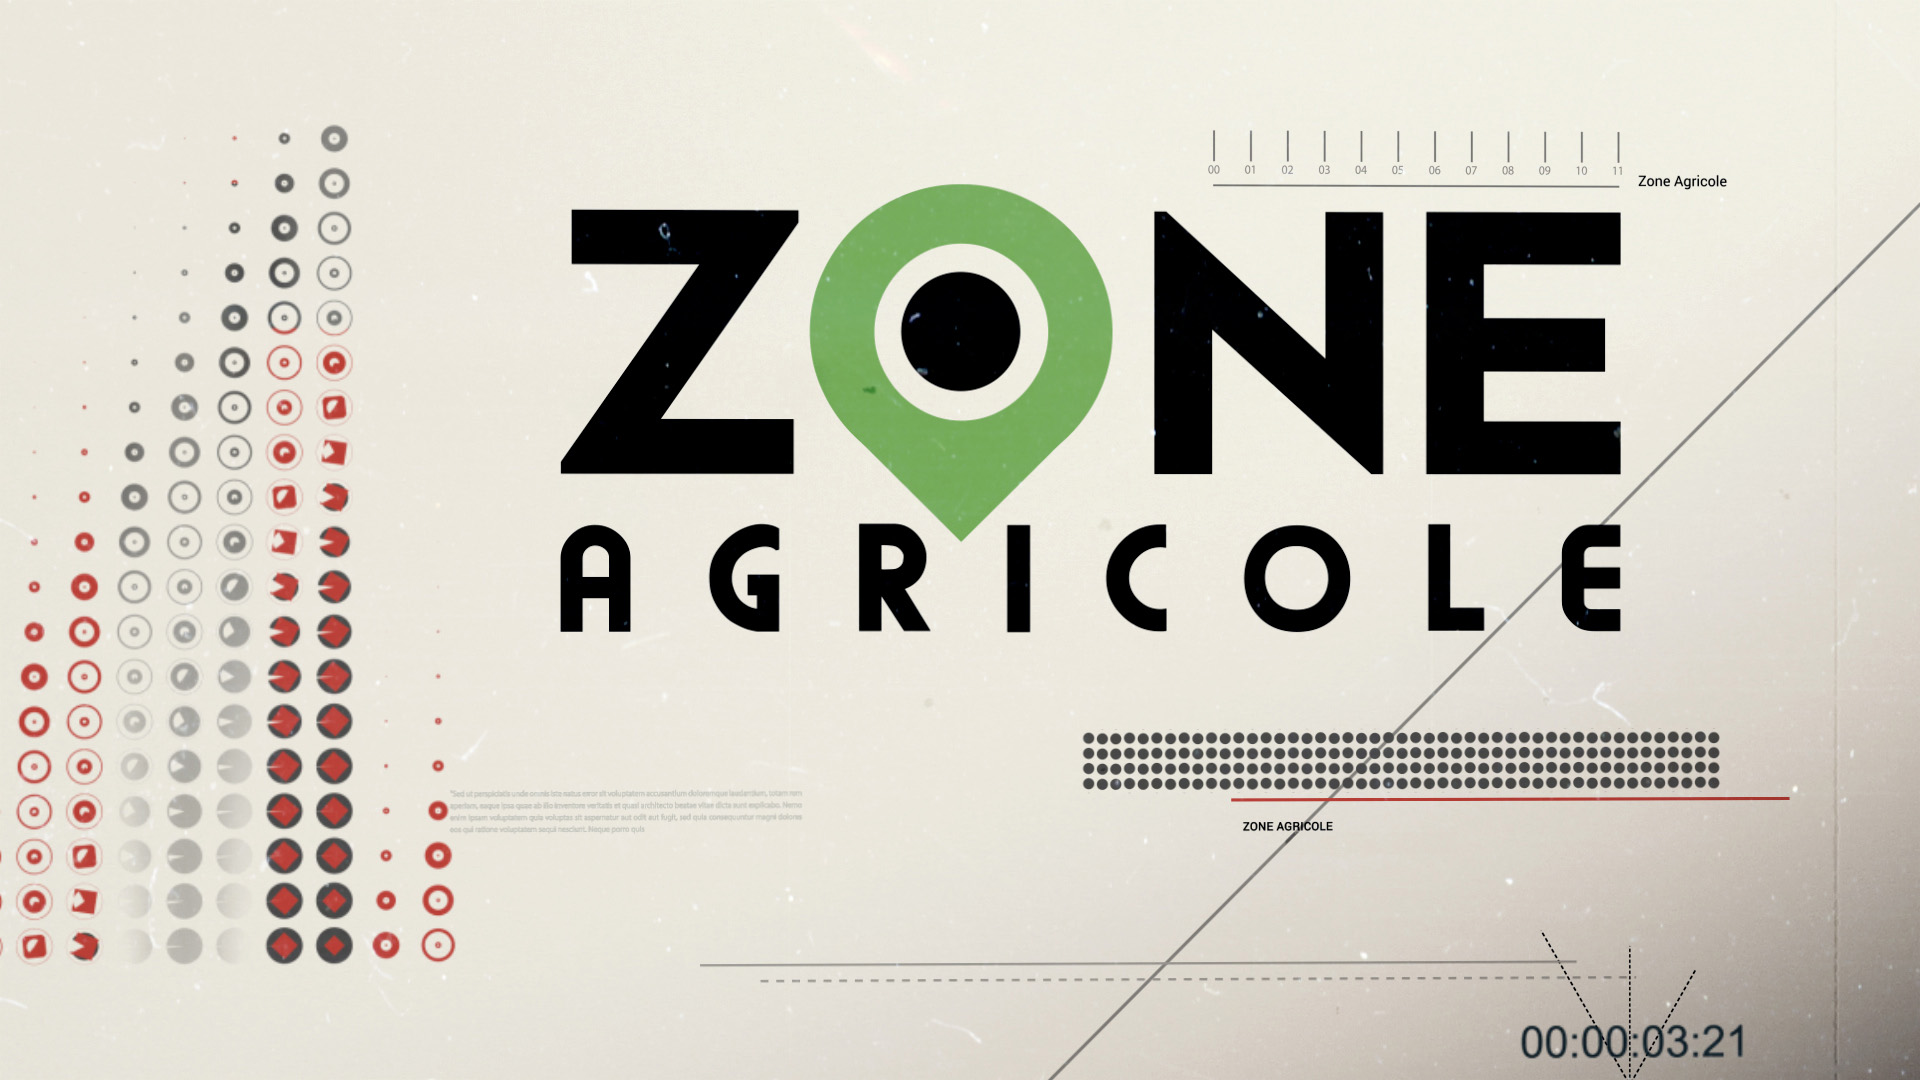 ZONE AGRICOLE